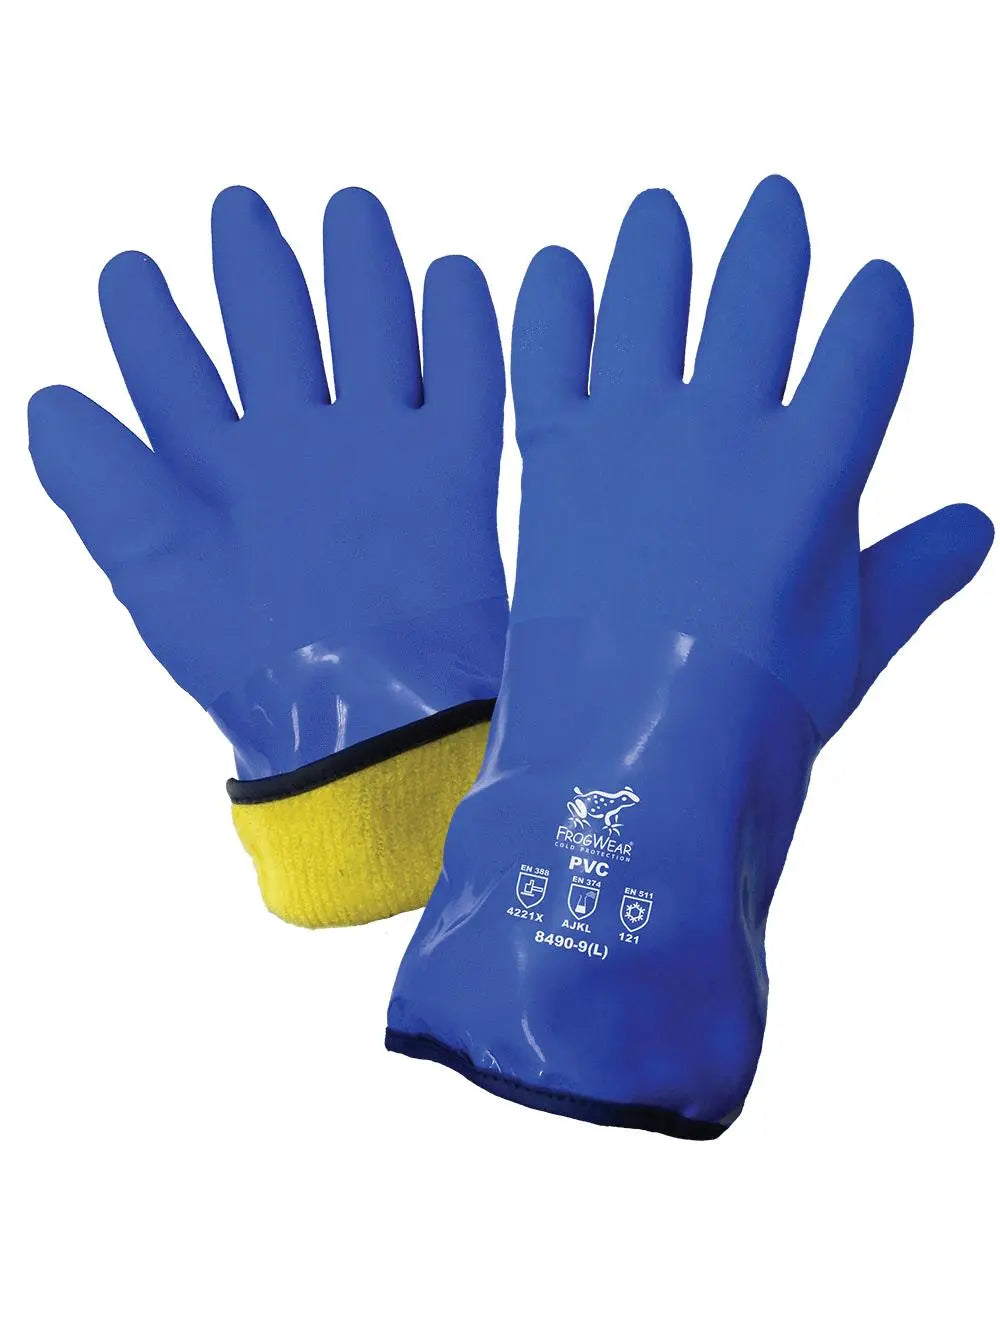 GLOBAL GLOVE - FROG WEAR 12" Blue Insulated PVC Glove - Becker Safety and Supply